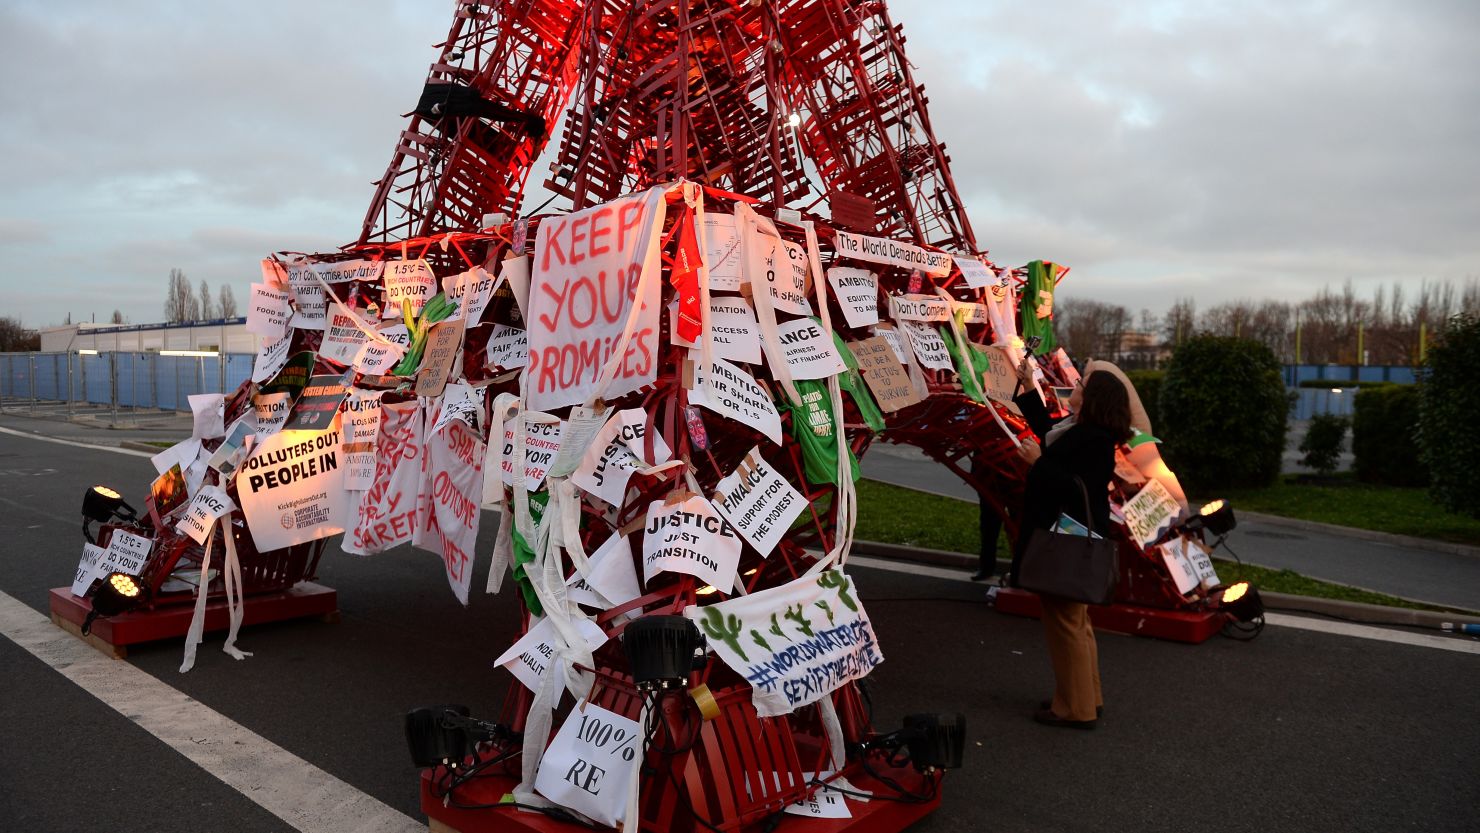 An Eiffel Tower made of bistro chairs is seen covered in messages related to climate change at COP21, the United Nations conference on climate change in Le Bourget, France.